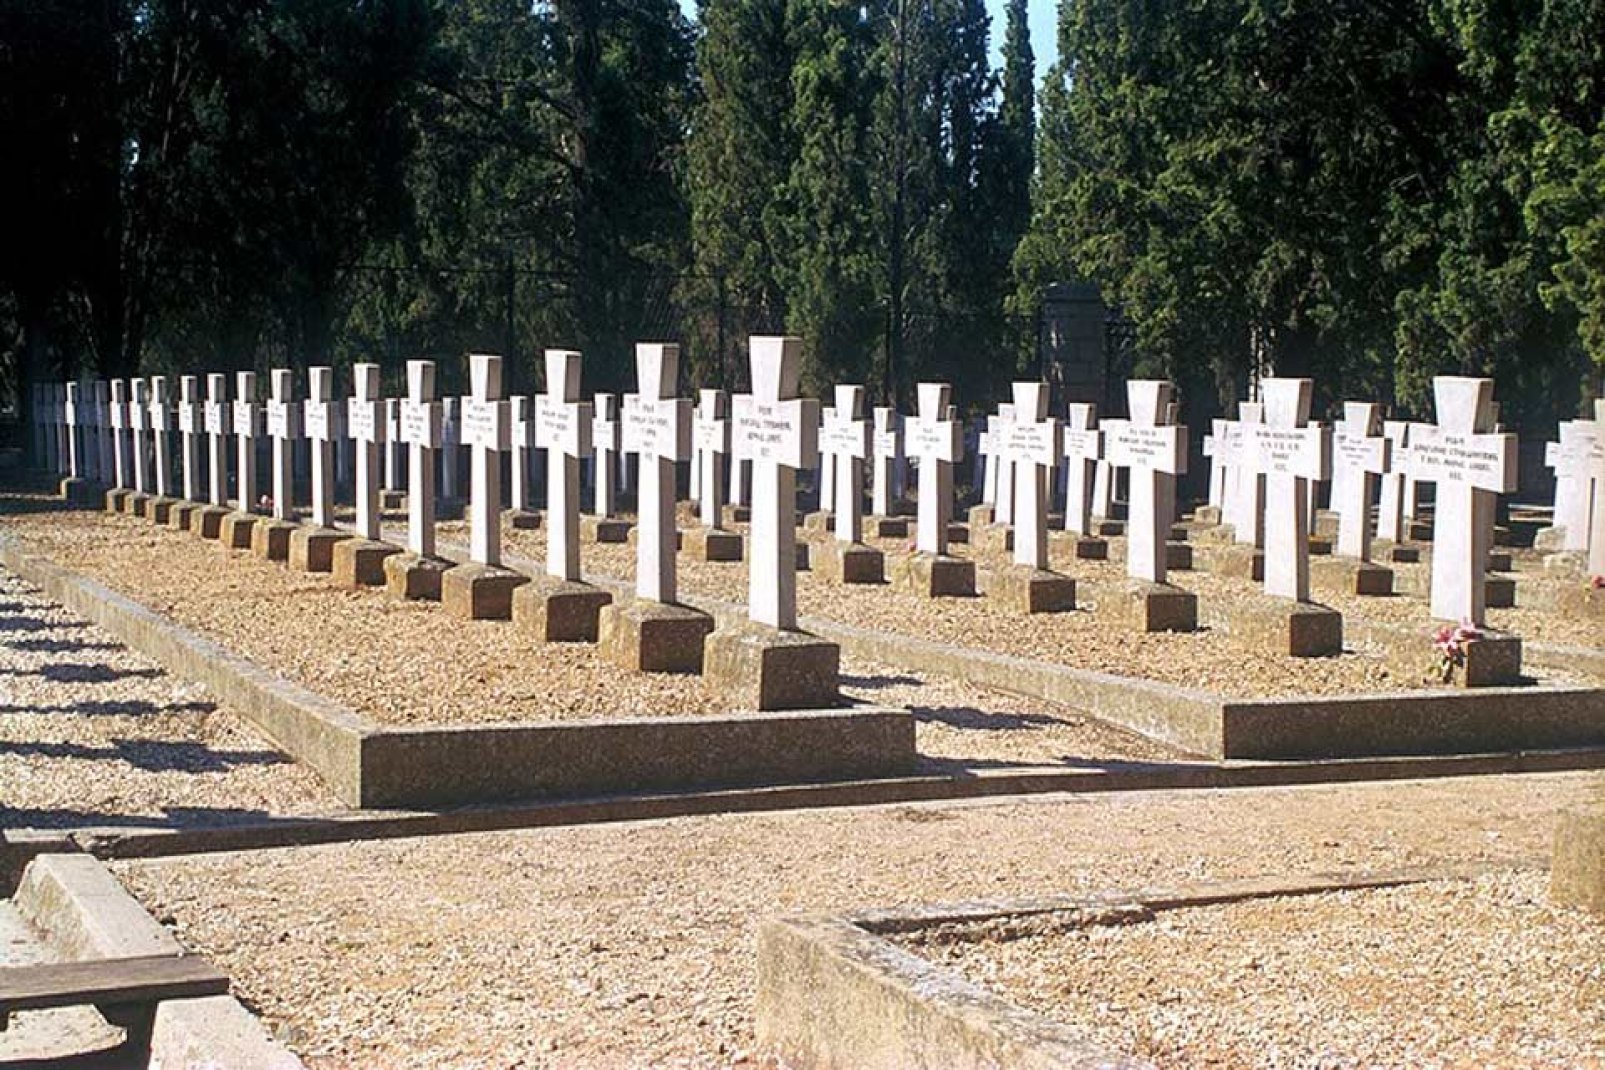 This cemetery holds the graves of more than 7,000 soldiers.